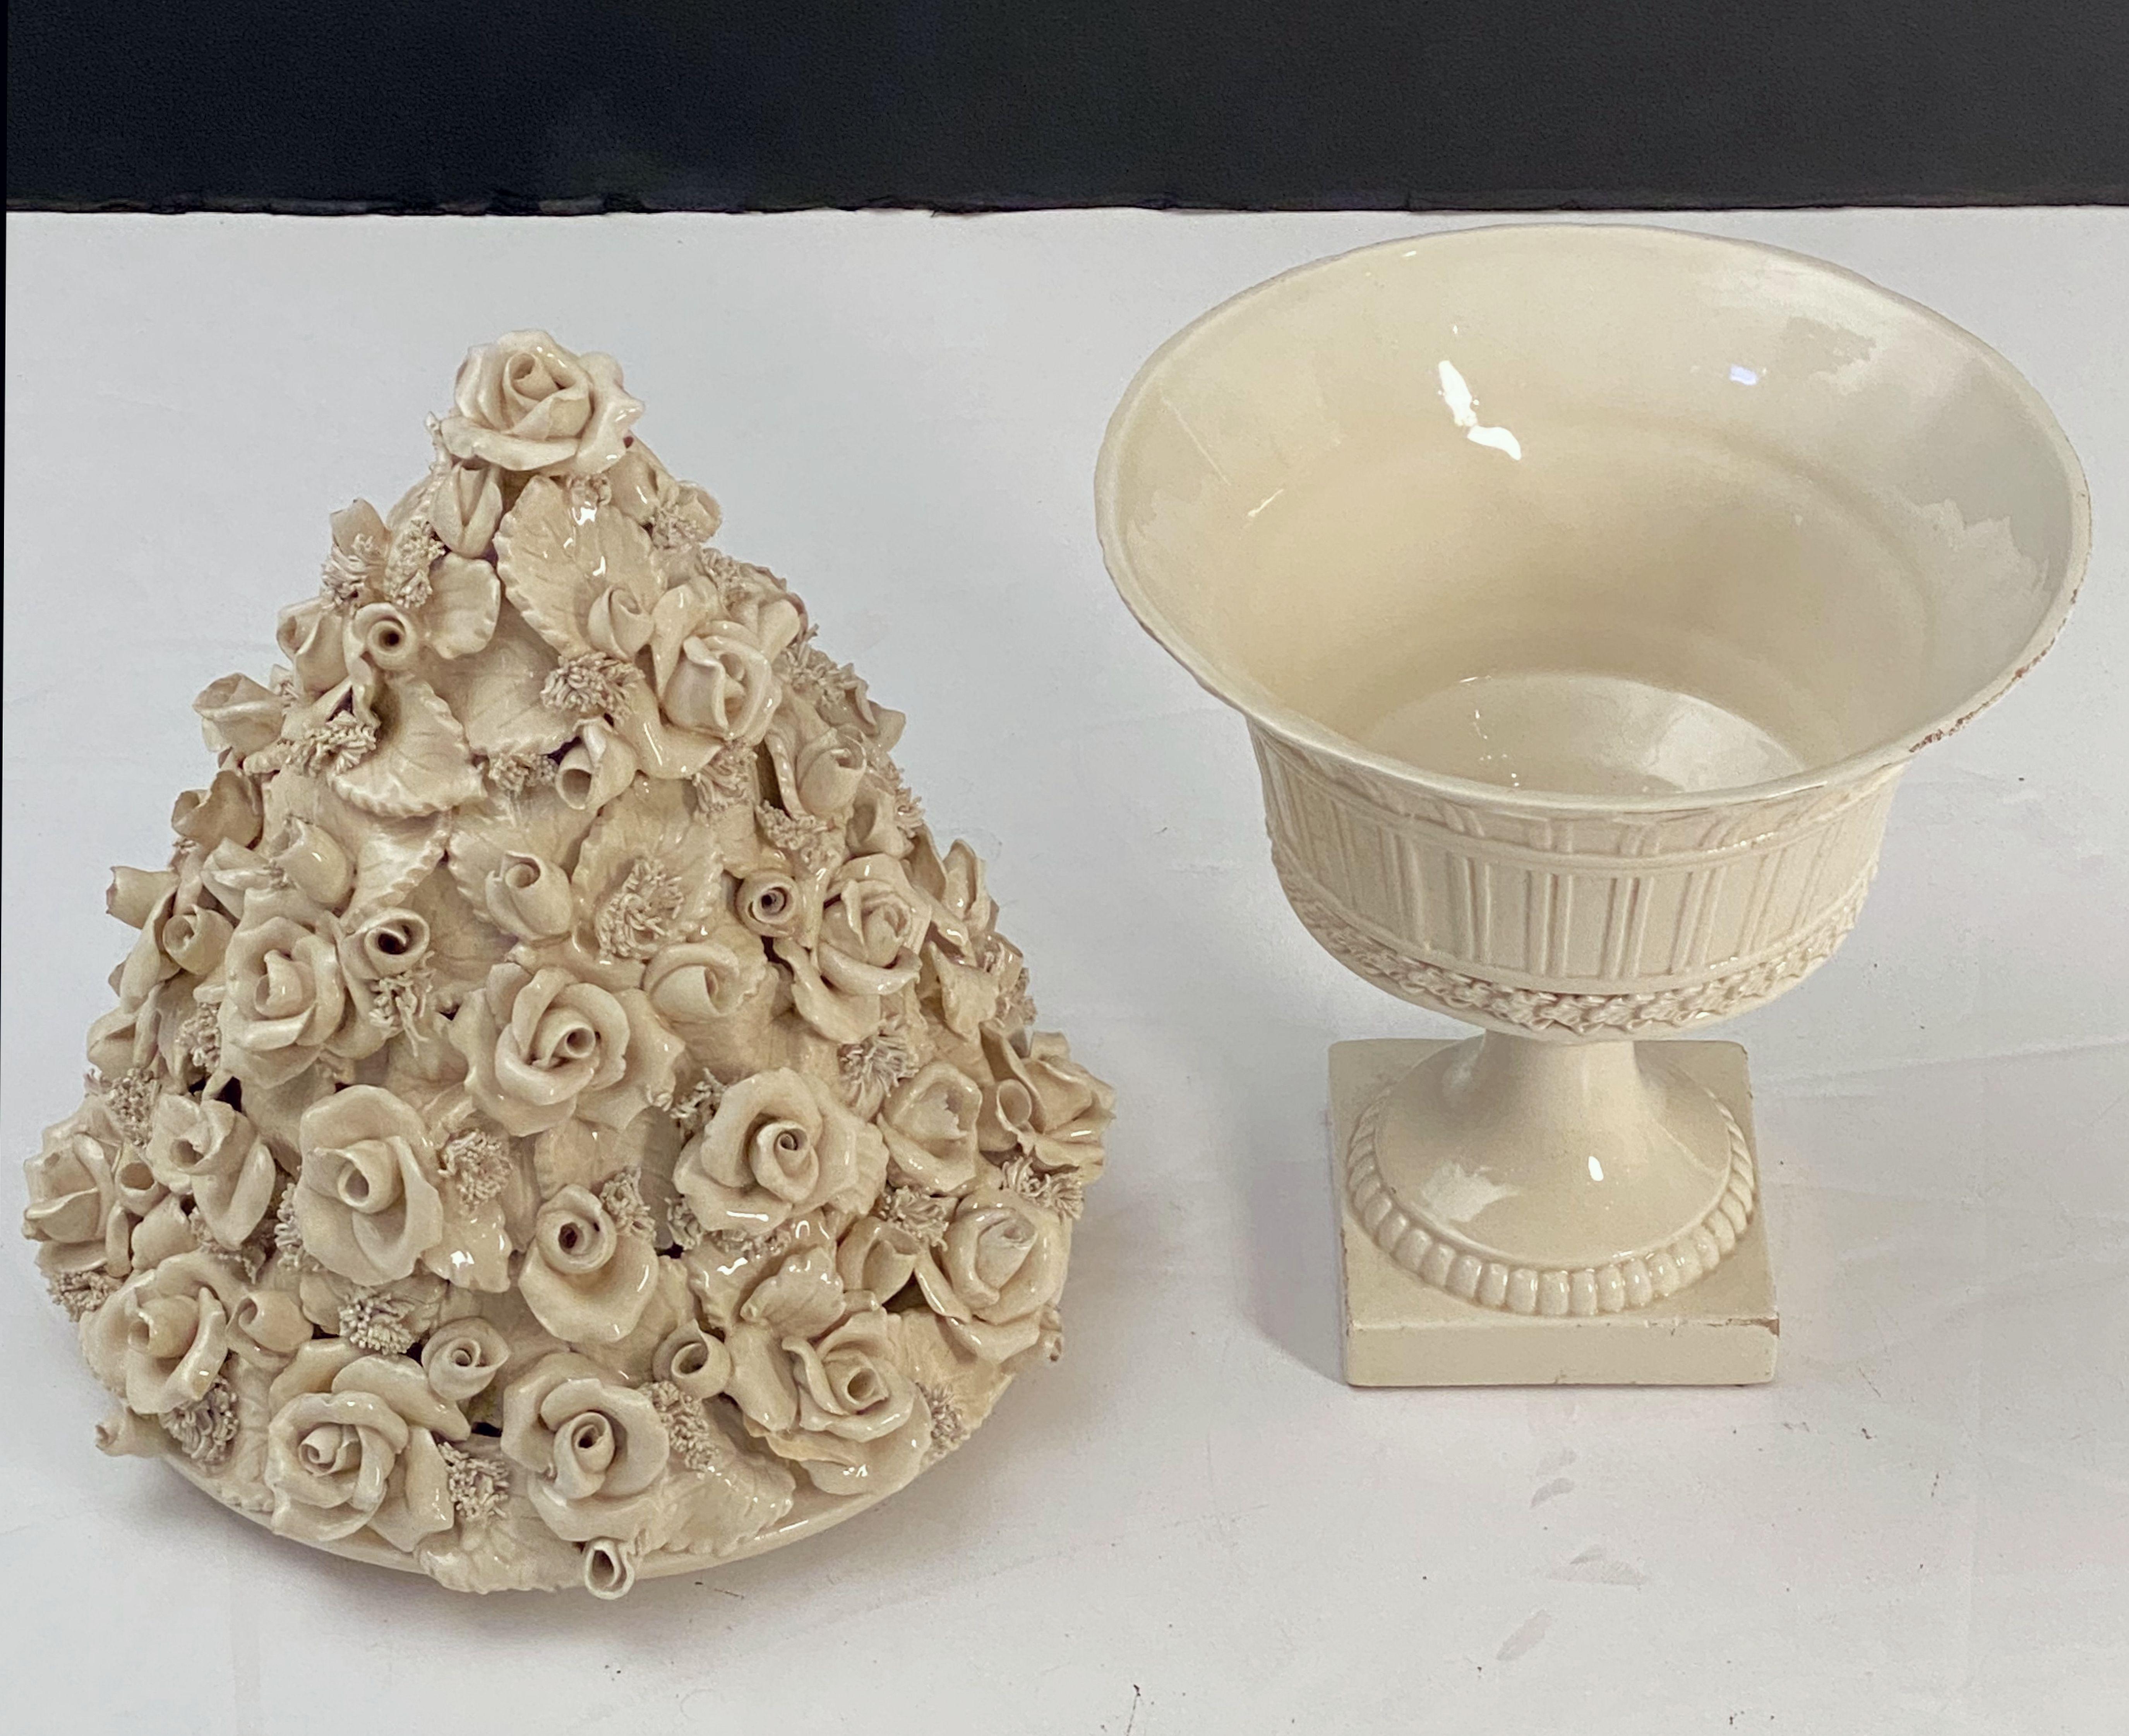 A fine large Italian cream-ware or white glazed ceramic pedestal bowl with rose topiary top, featuring a fitted lid with a relief of roses (or rosettes) and bocage around the circumference, over a lower body with bowl and pedestal support on a